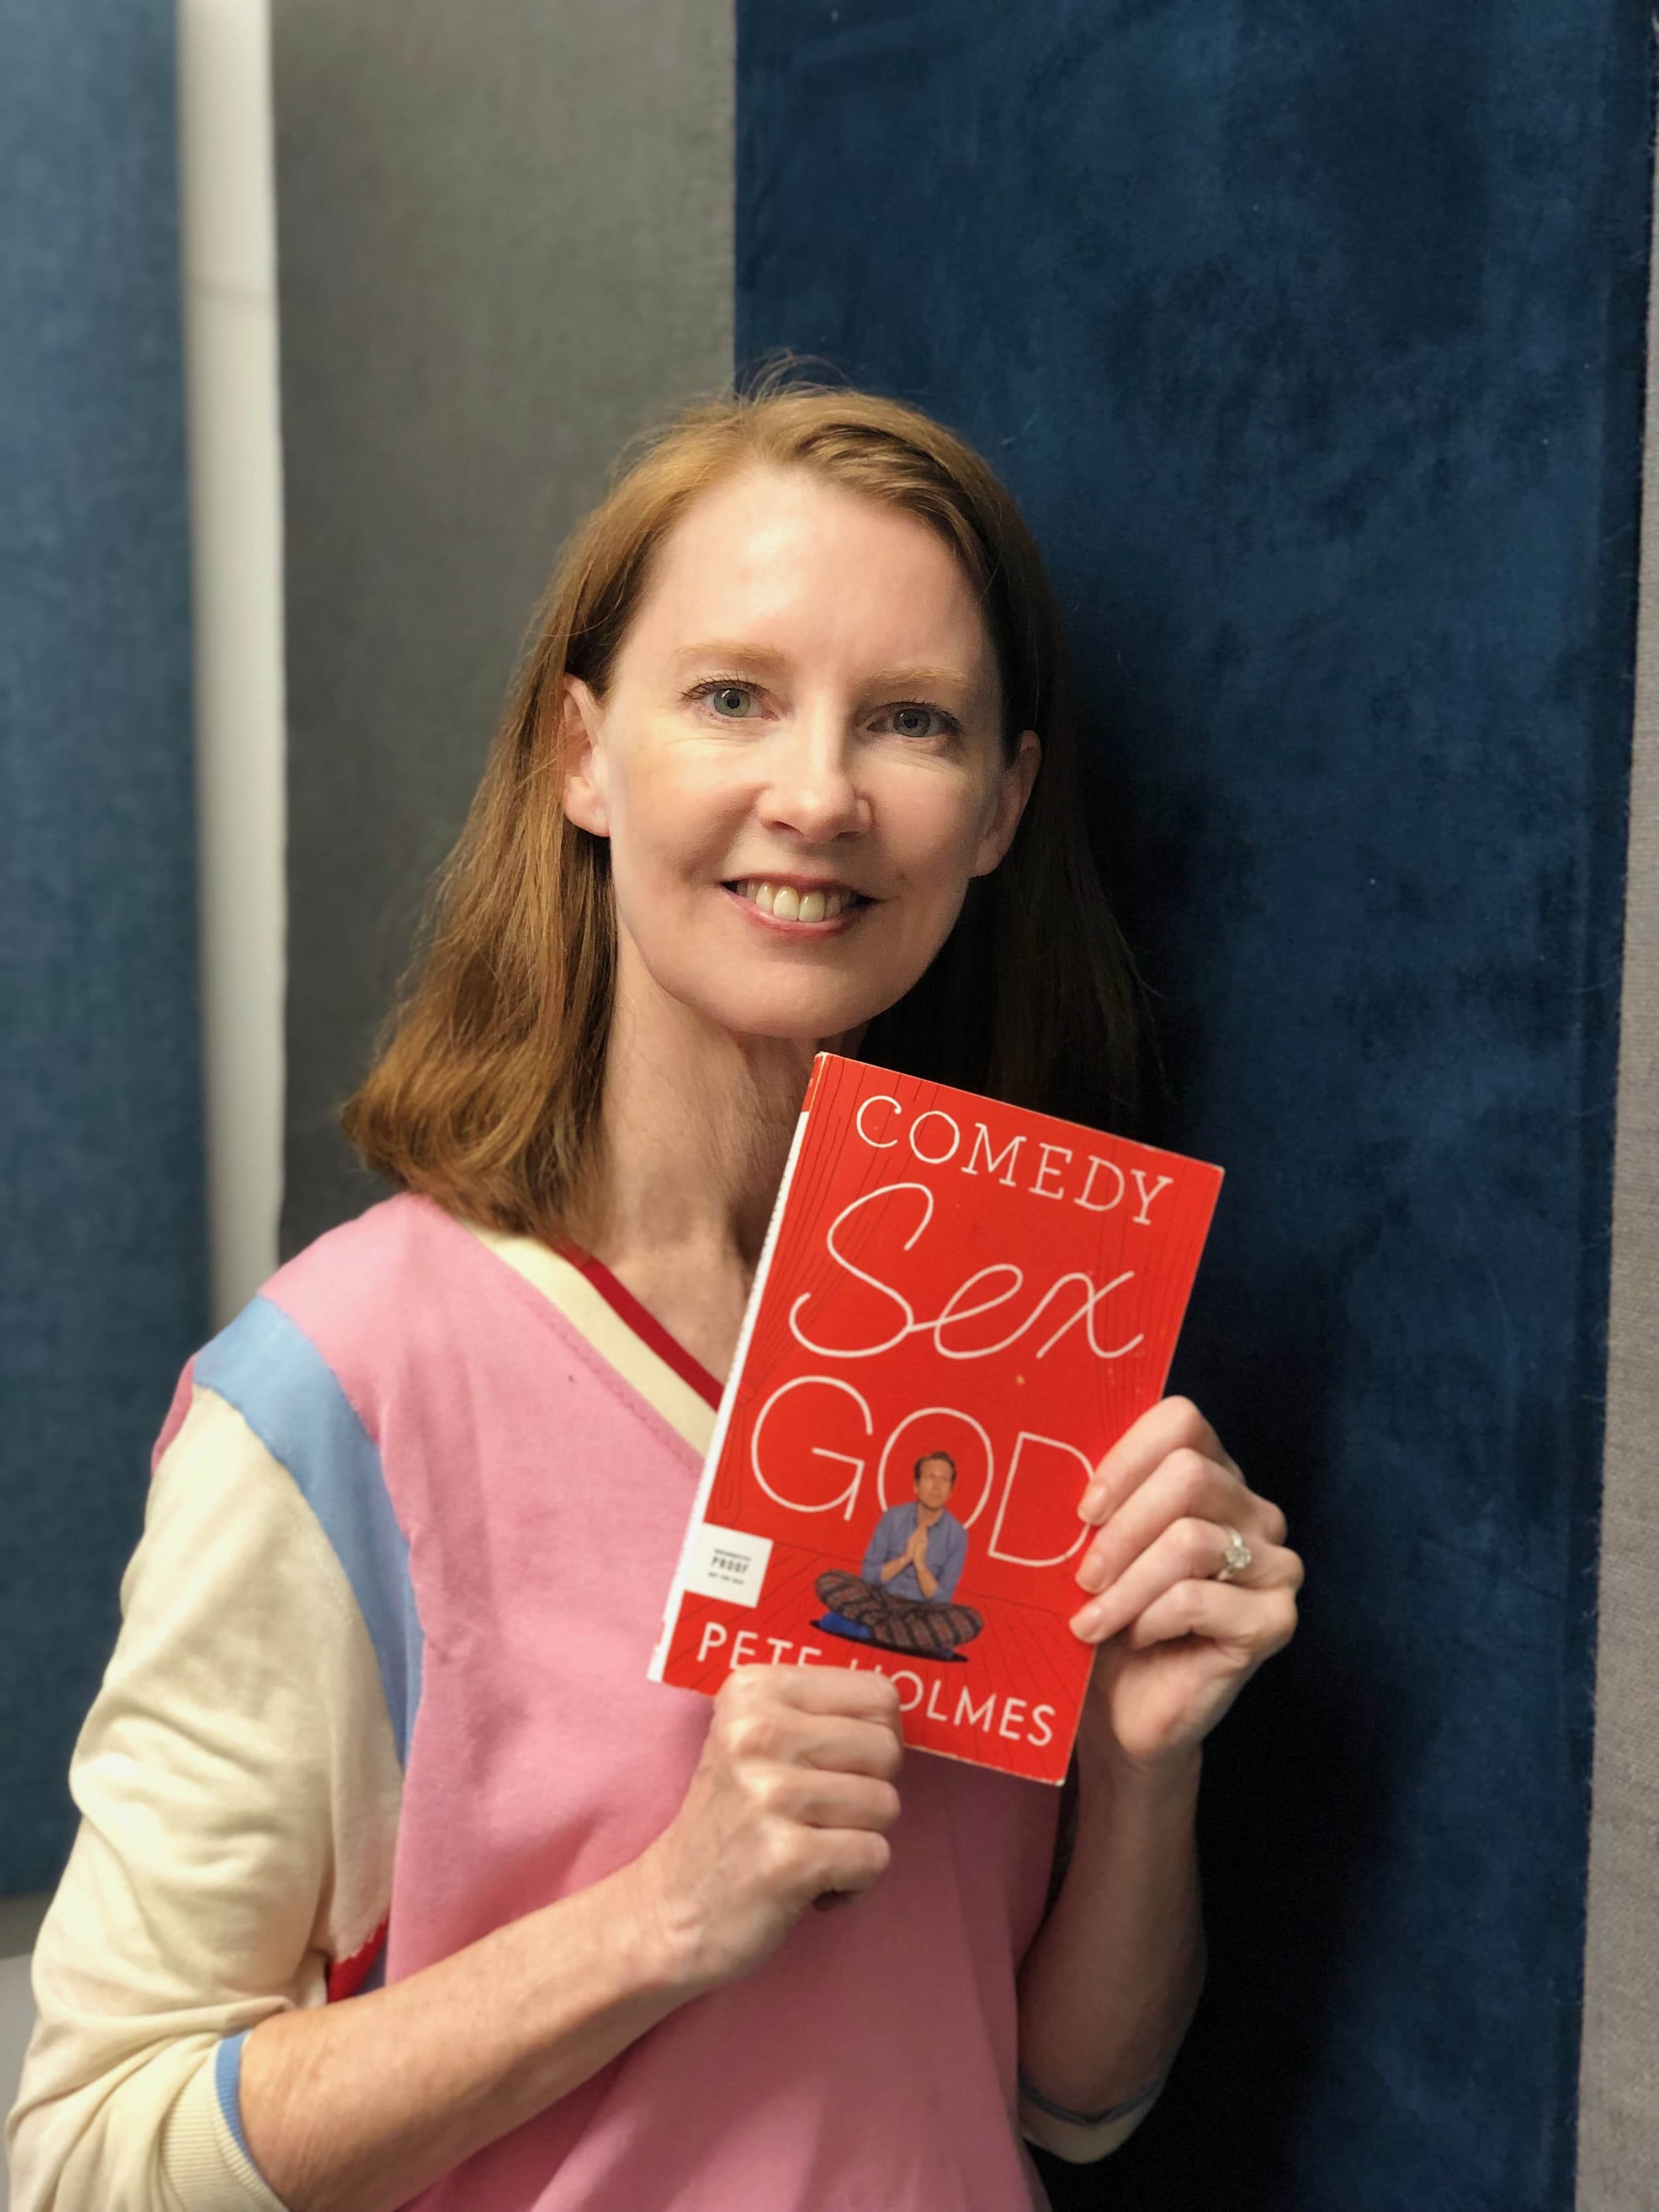 Gretchen with book Comedy Sex God by Pete Holmes memoir